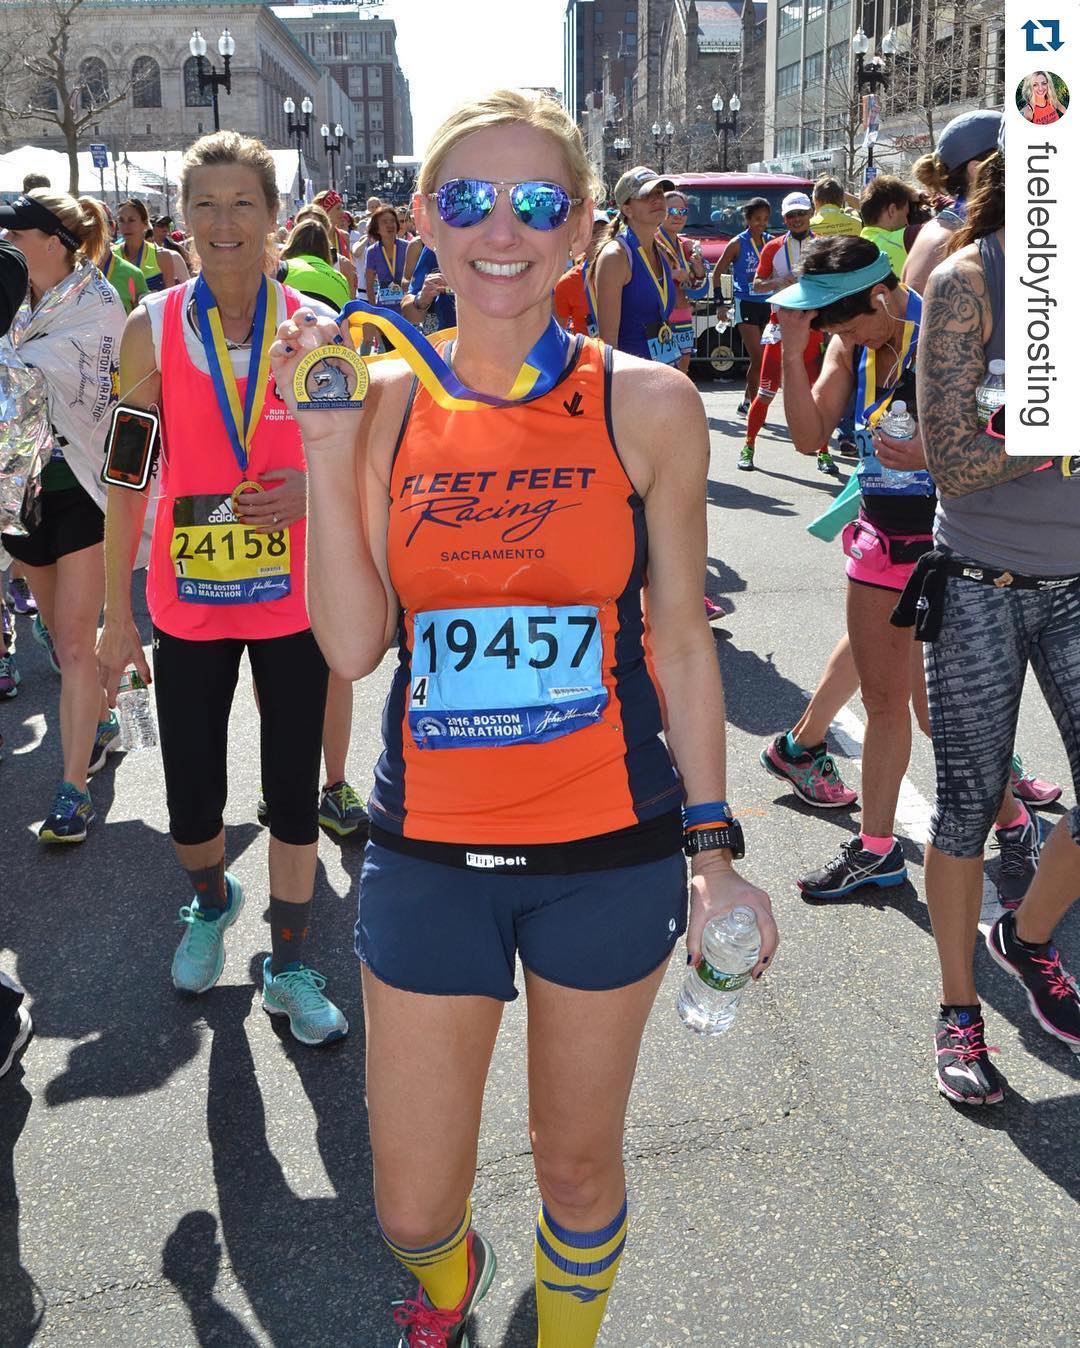 The vibes are still strong from the Boston Marathon and today marks just 1 week from the event. Congratulations to all of the finishers and a special congrats to all of our BQ runners who qualified at CIM!!! Jen @fueledbyfrosting qualified at CIM in 2014 and had the time of her life at the Boston Marathon